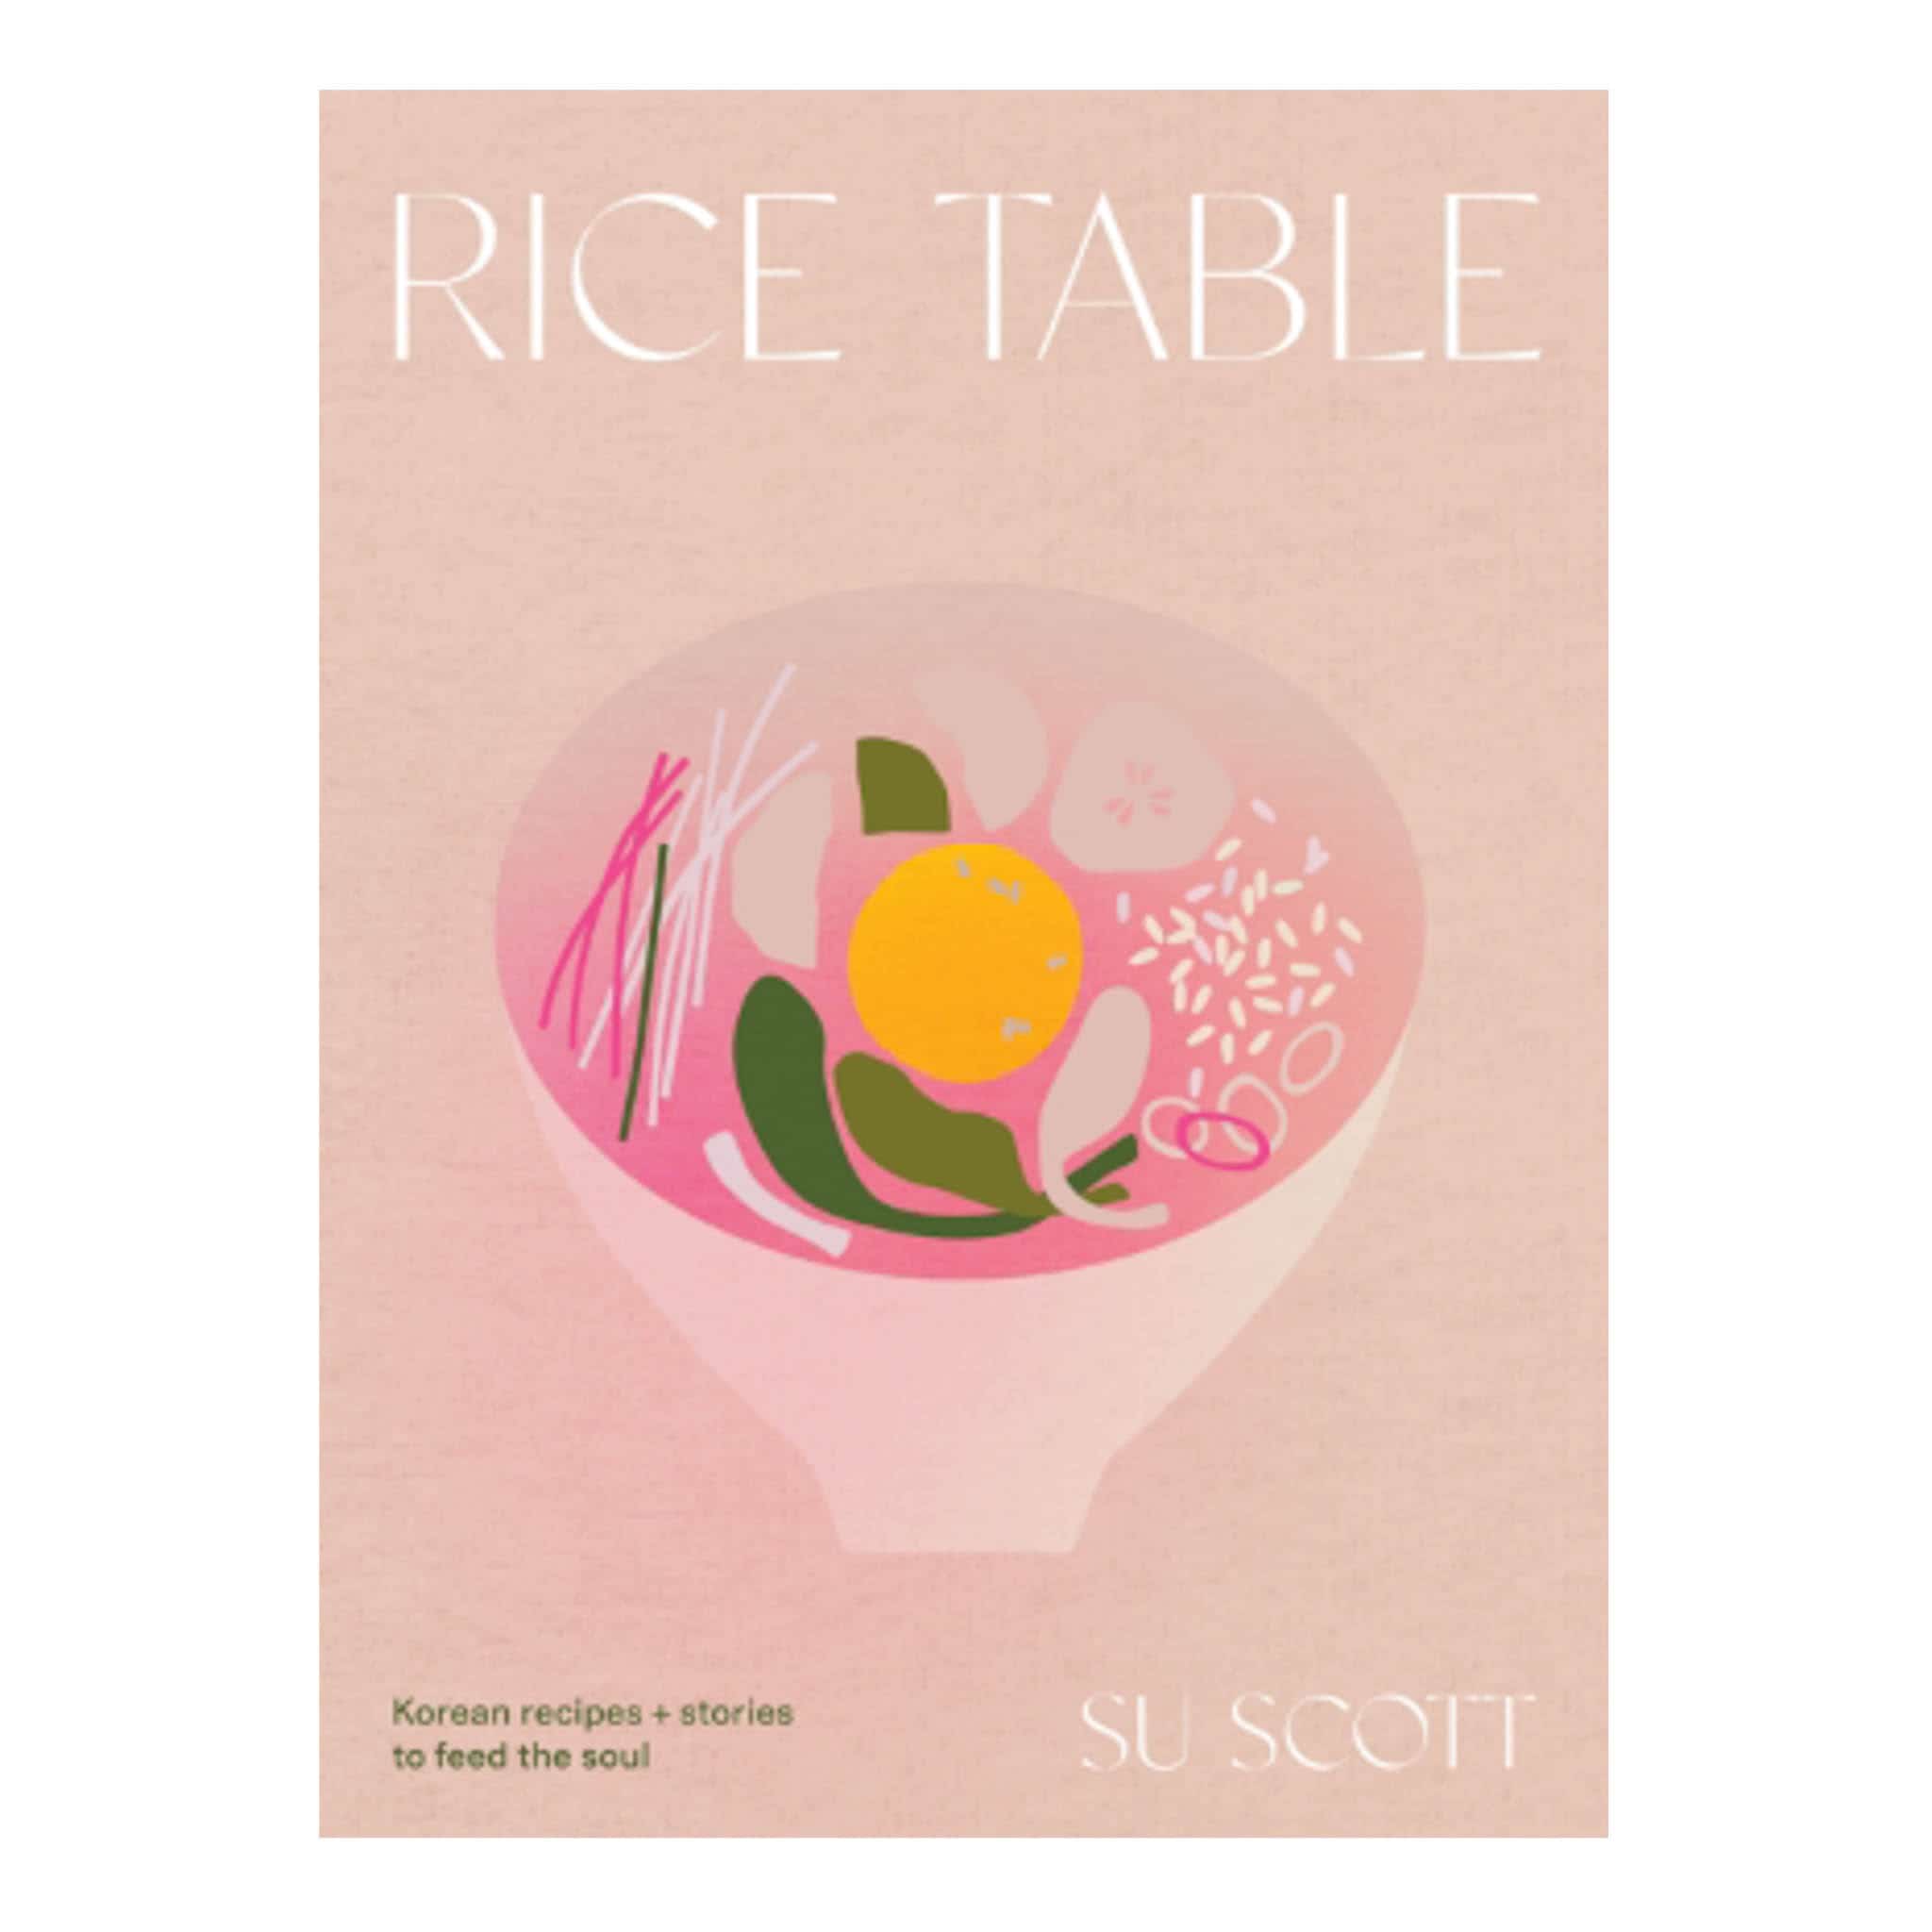 Rice Table: Korean Recipes and Stories to Feed the Soul, by Su Scott